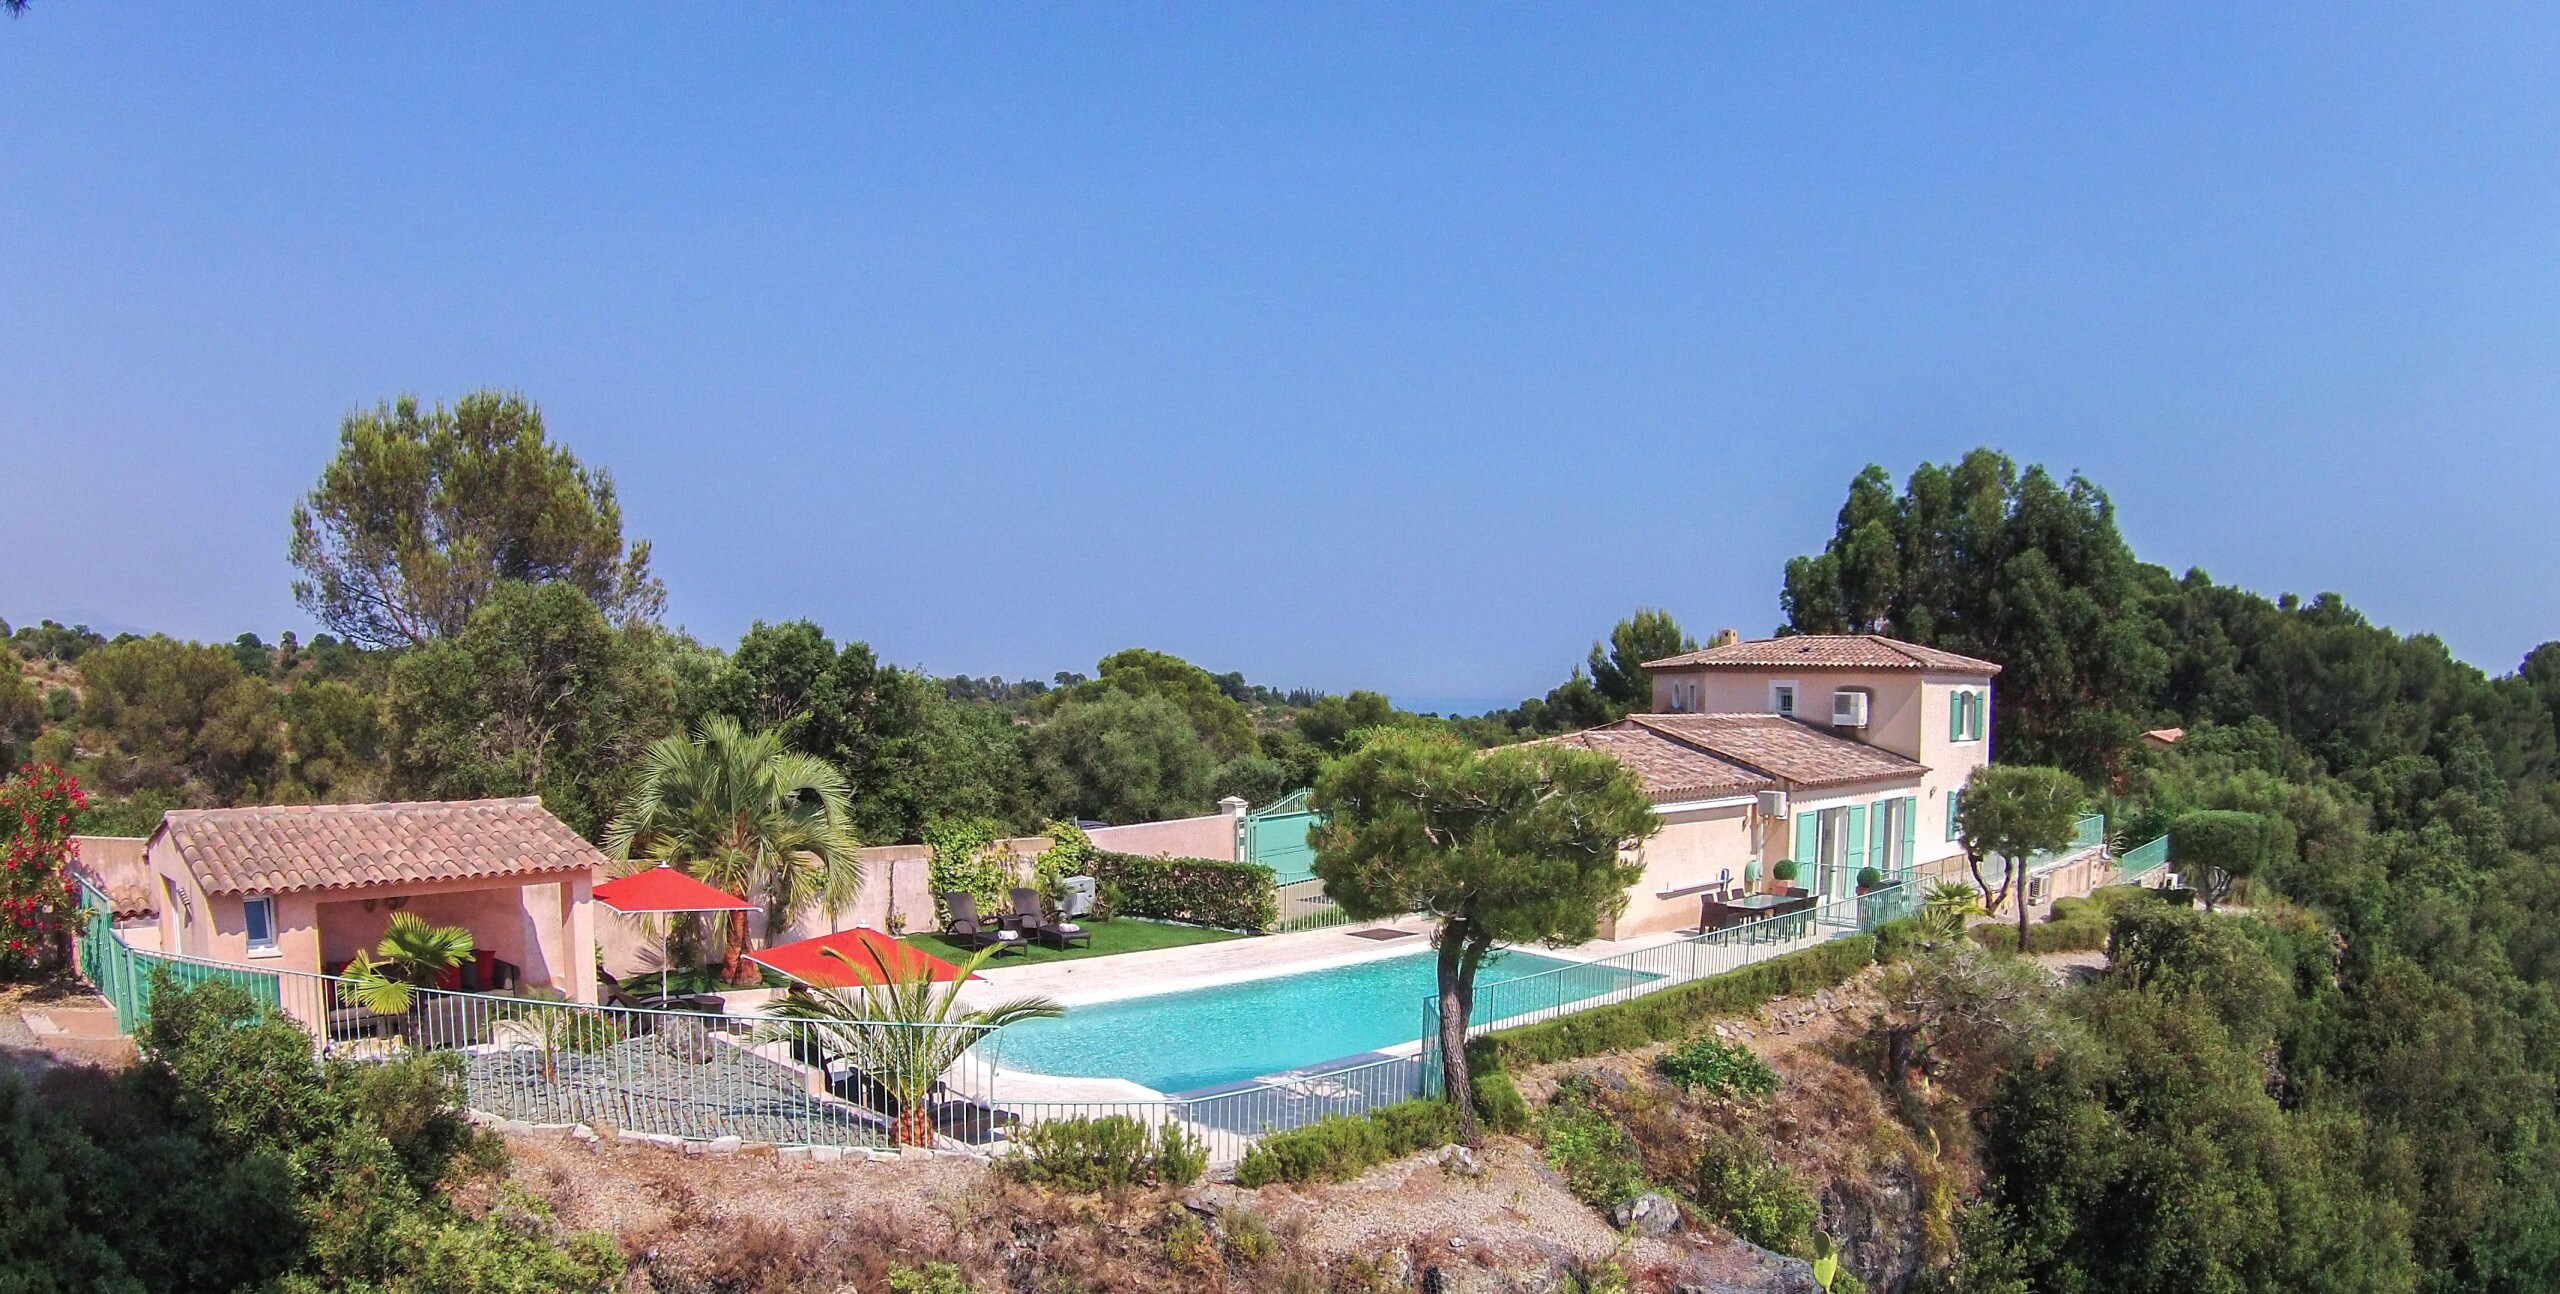 Property Image 1 - Lovely 4-bedroom villa with heated pool, outdoor jacuzzi and amazing views